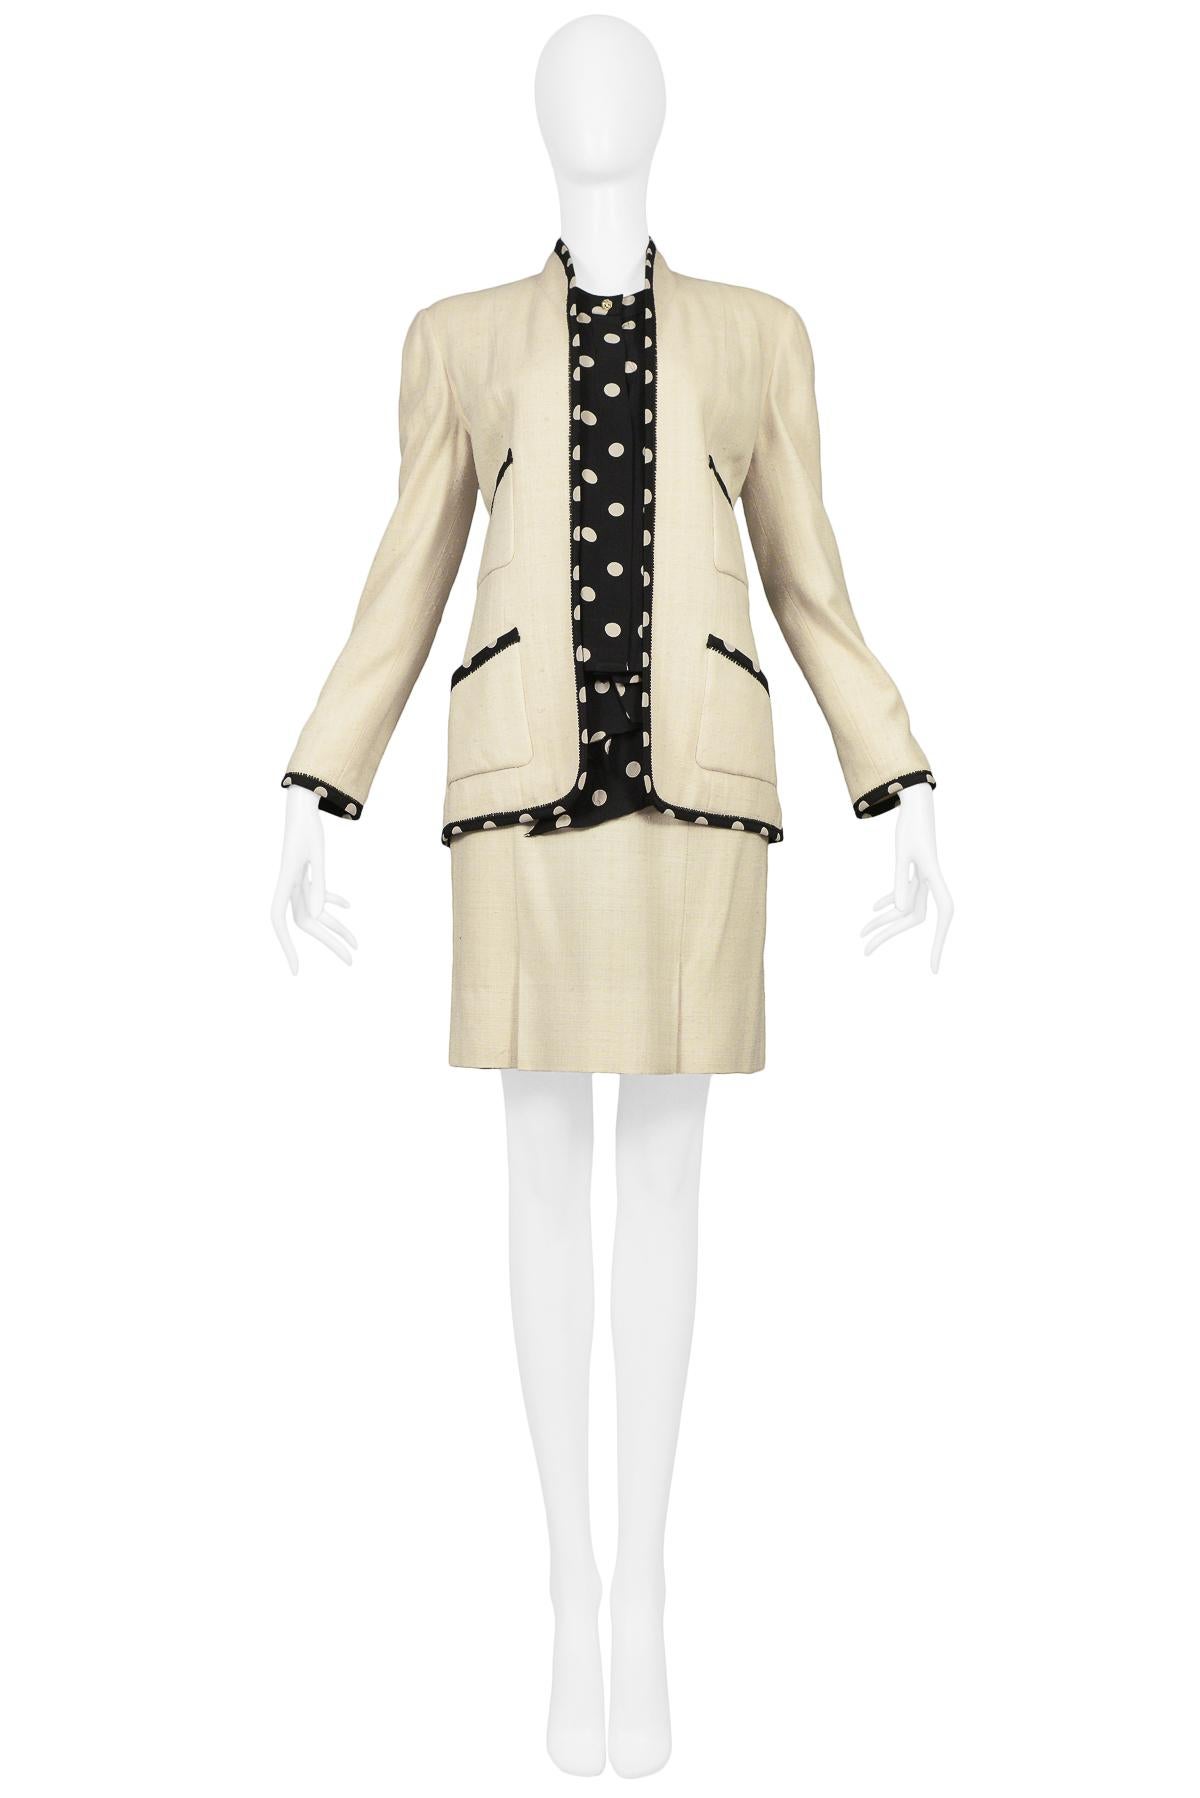 Vintage Chanel cream linen skirt suit. Open front suit jacket with front pockets trimmed in polka dot silk. Set includes matching box pleat skirt with silk polka dot fabric waist and coordinating silk blouse. This ensemble is a 3-piece